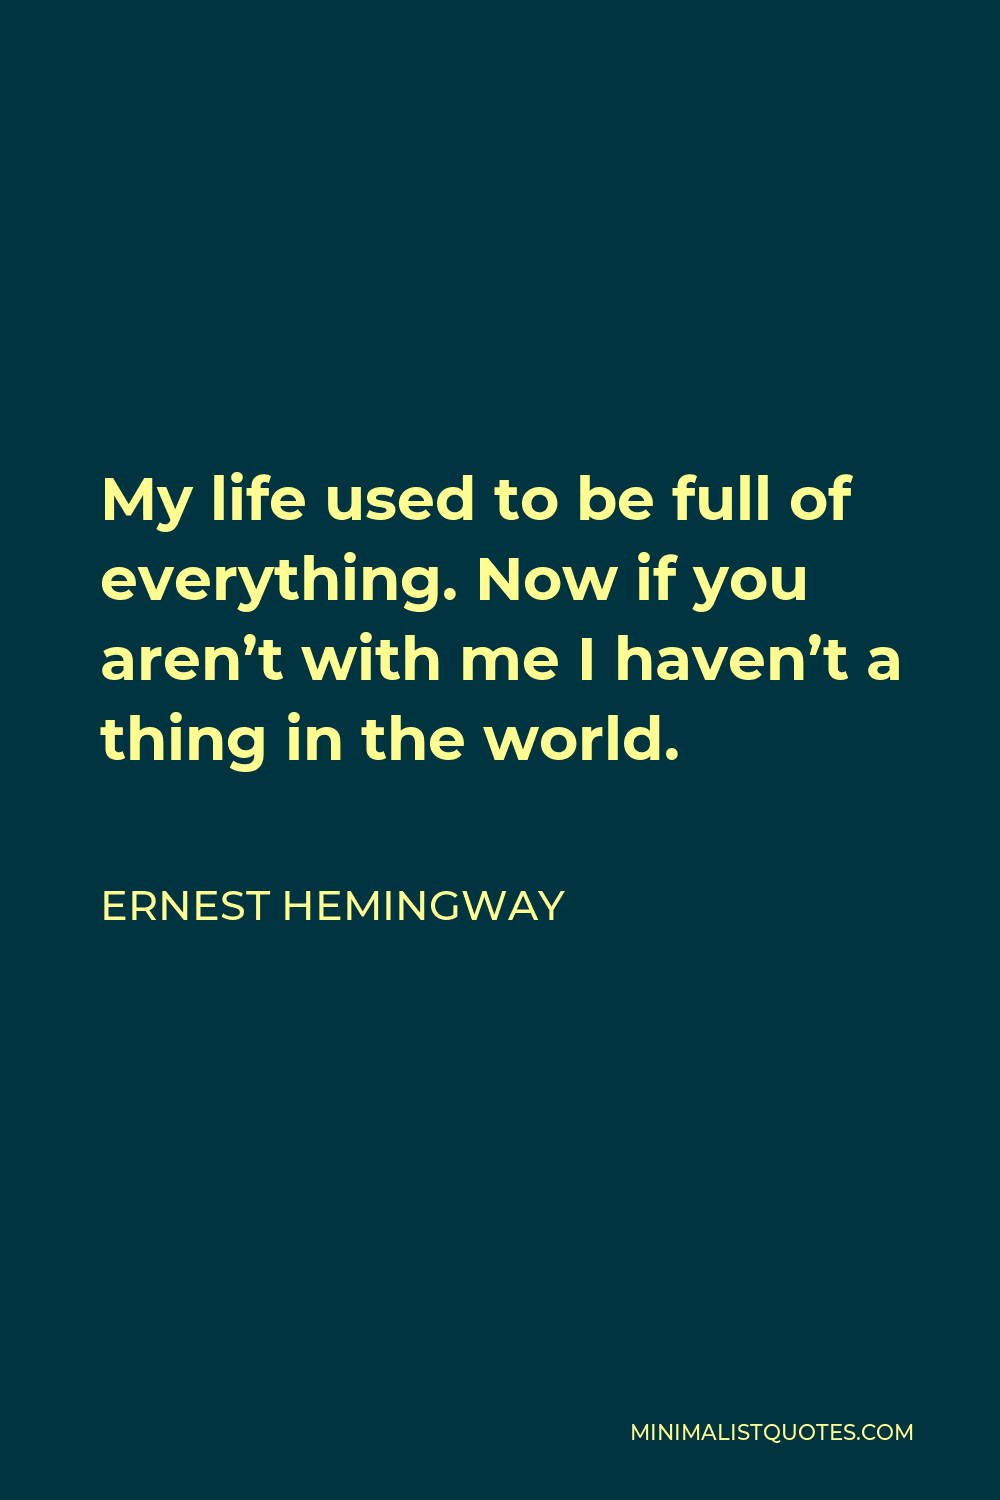 Ernest Hemingway Quote - My life used to be full of everything. Now if you aren’t with me I haven’t a thing in the world.